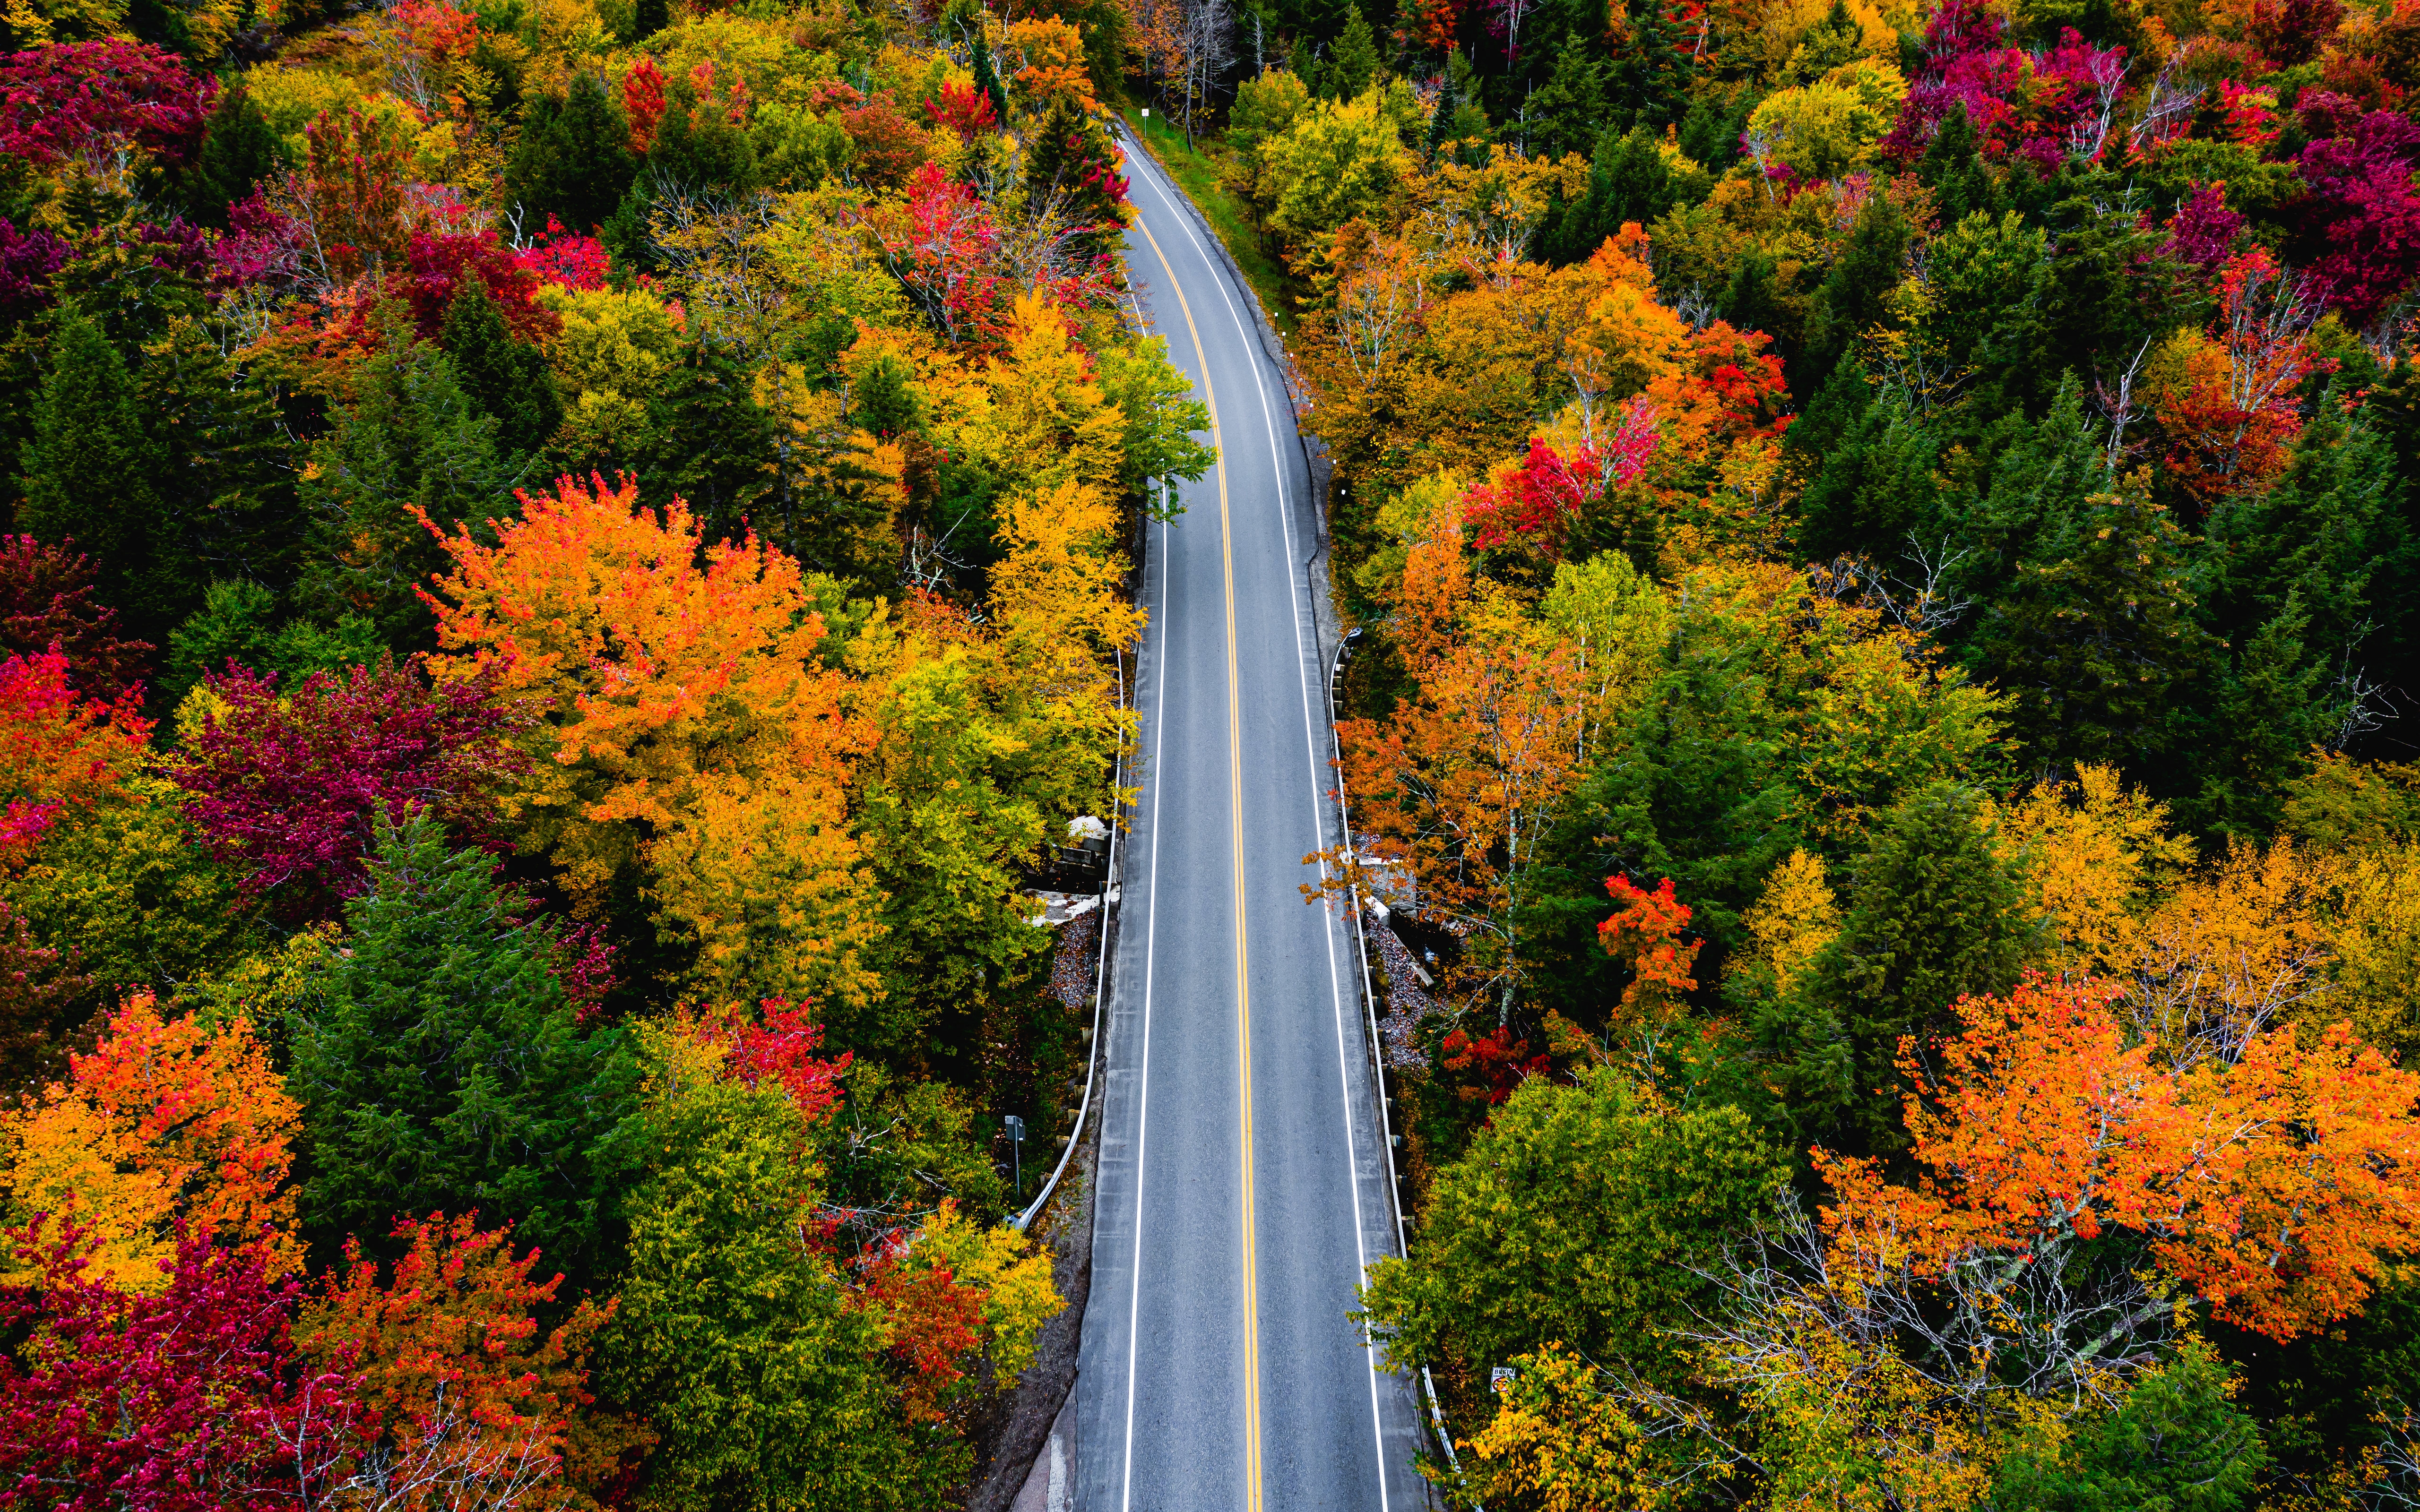 HD wallpaper, Fall Colors, Road, Country Road, Maple Trees, 5K, Landscape, Autumn, Usa